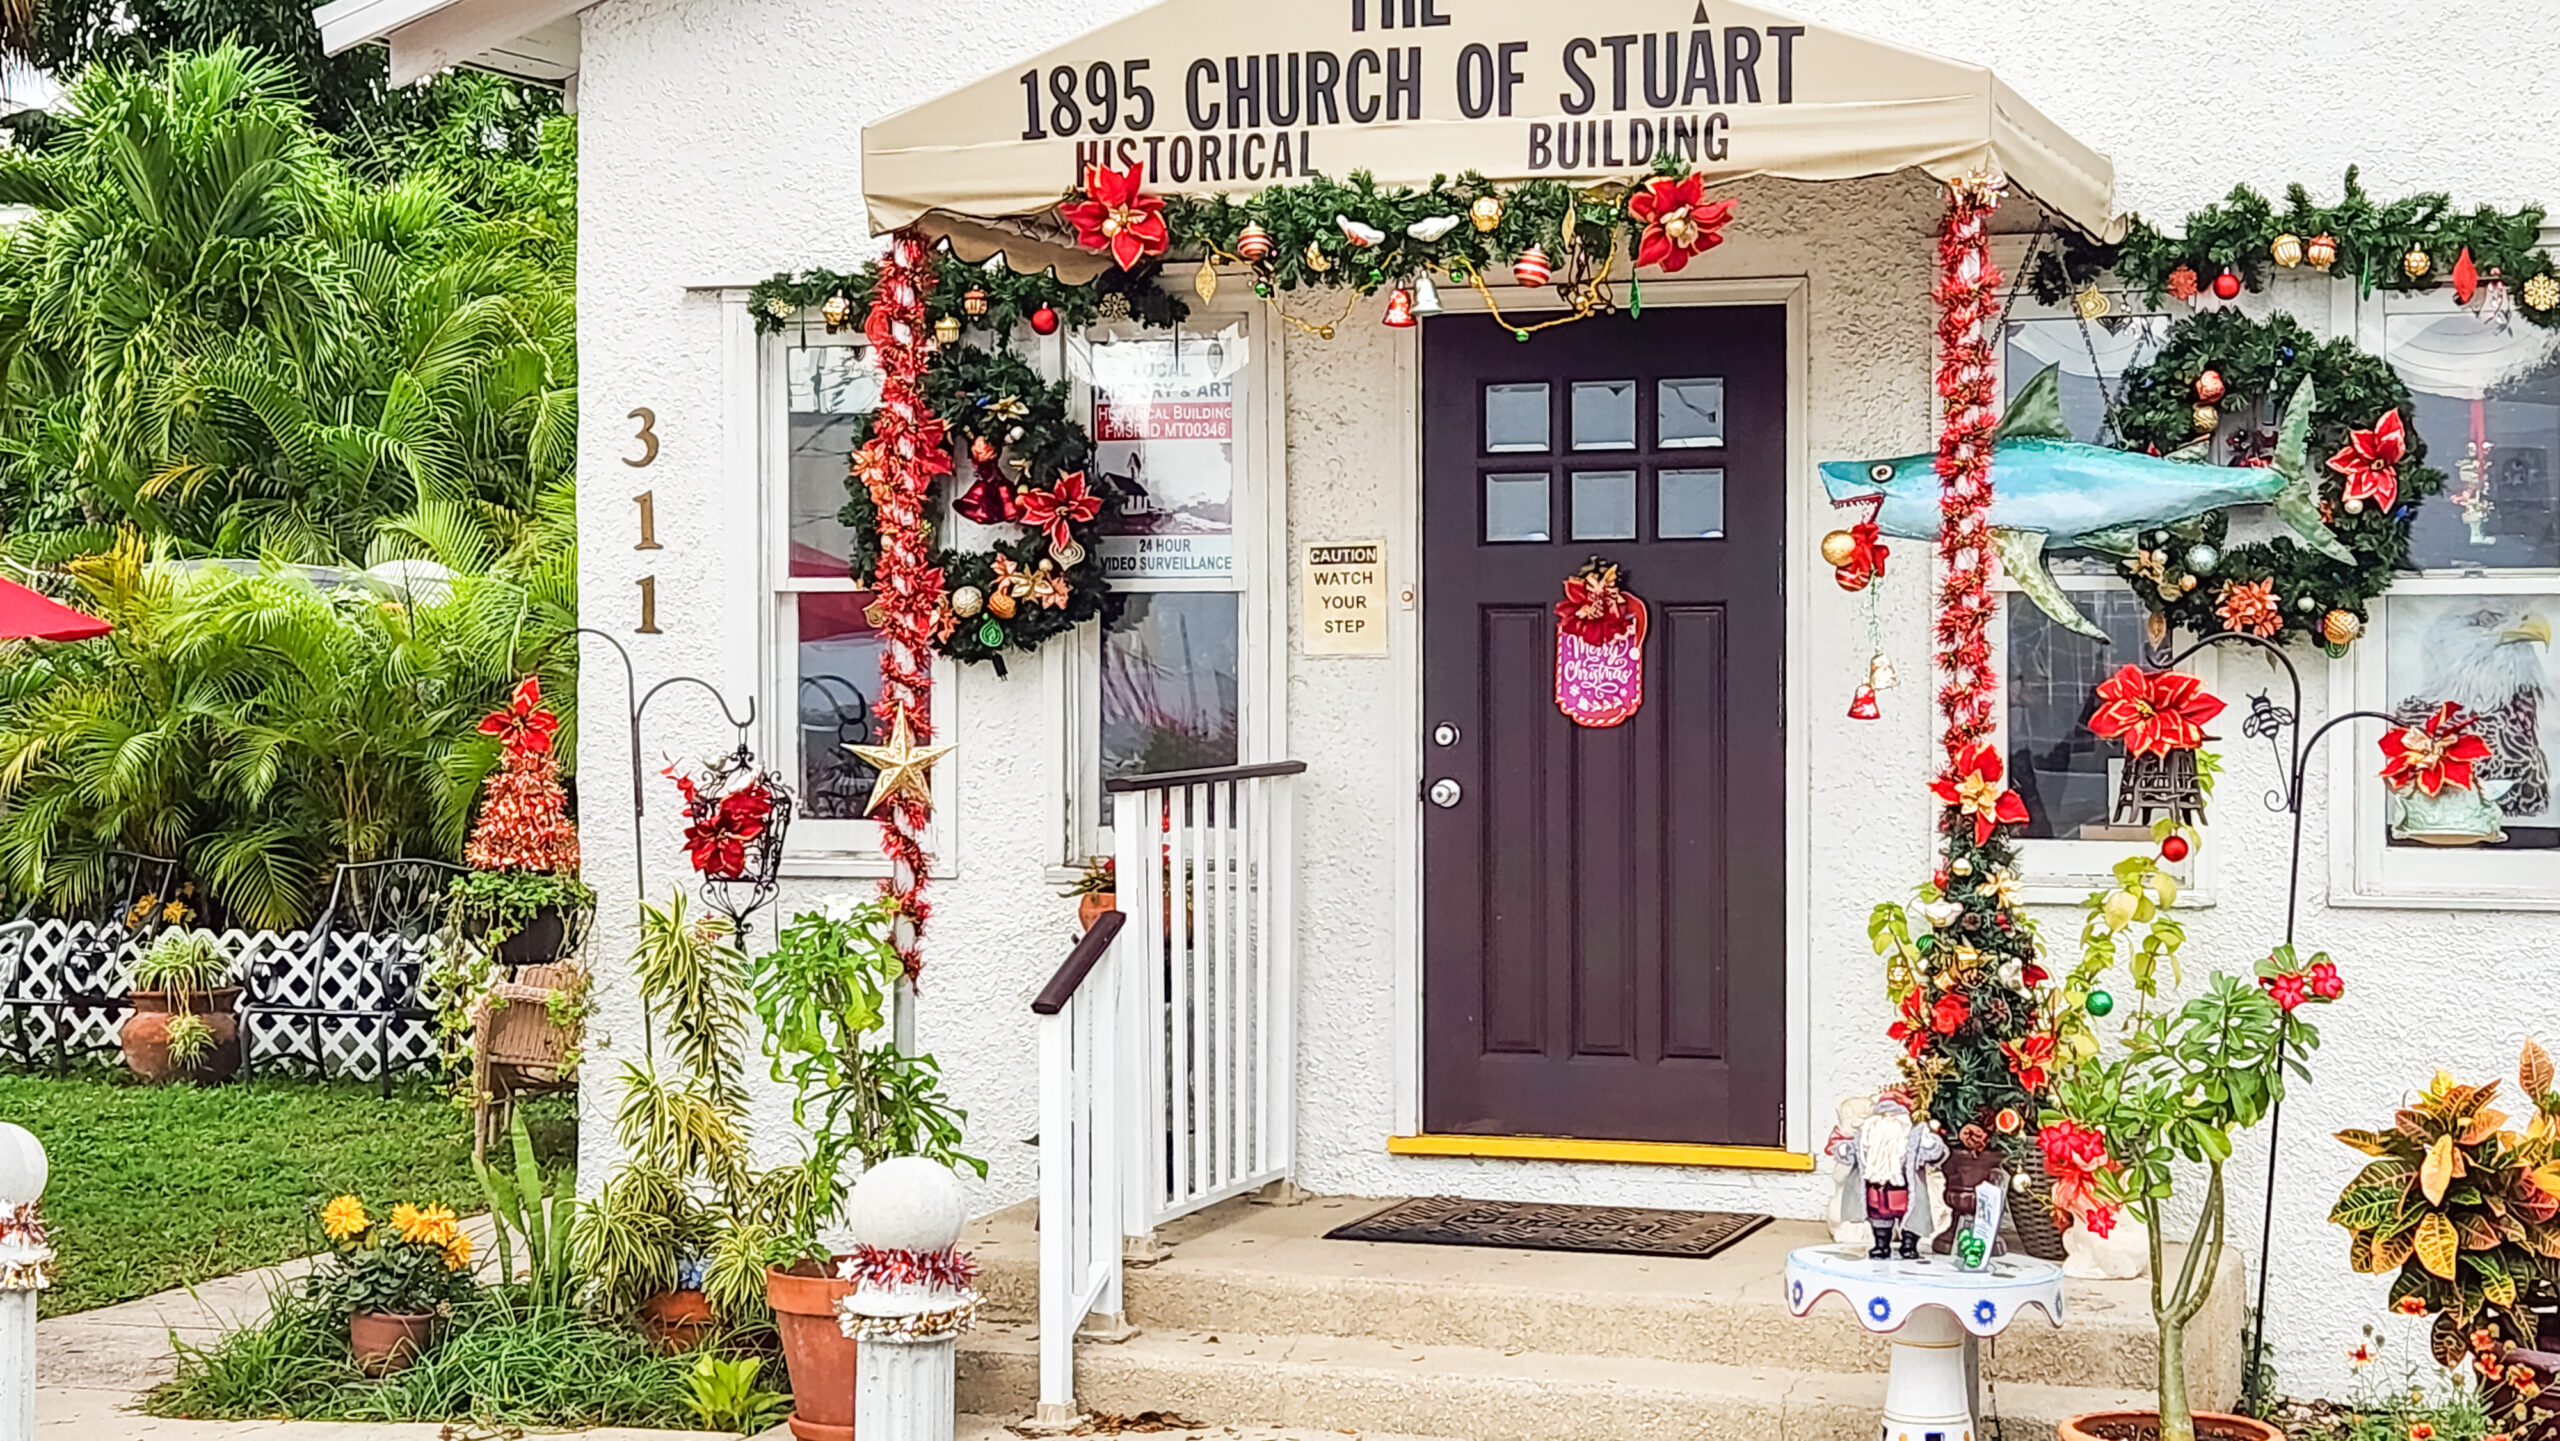 The 1895 Church of StuArt, the oldest church building located in what is now Martin County, Florida. Supporting Local History and Art. Historical Preservation, the City of Stuart, Martin County, Florida. Historical Building Tour